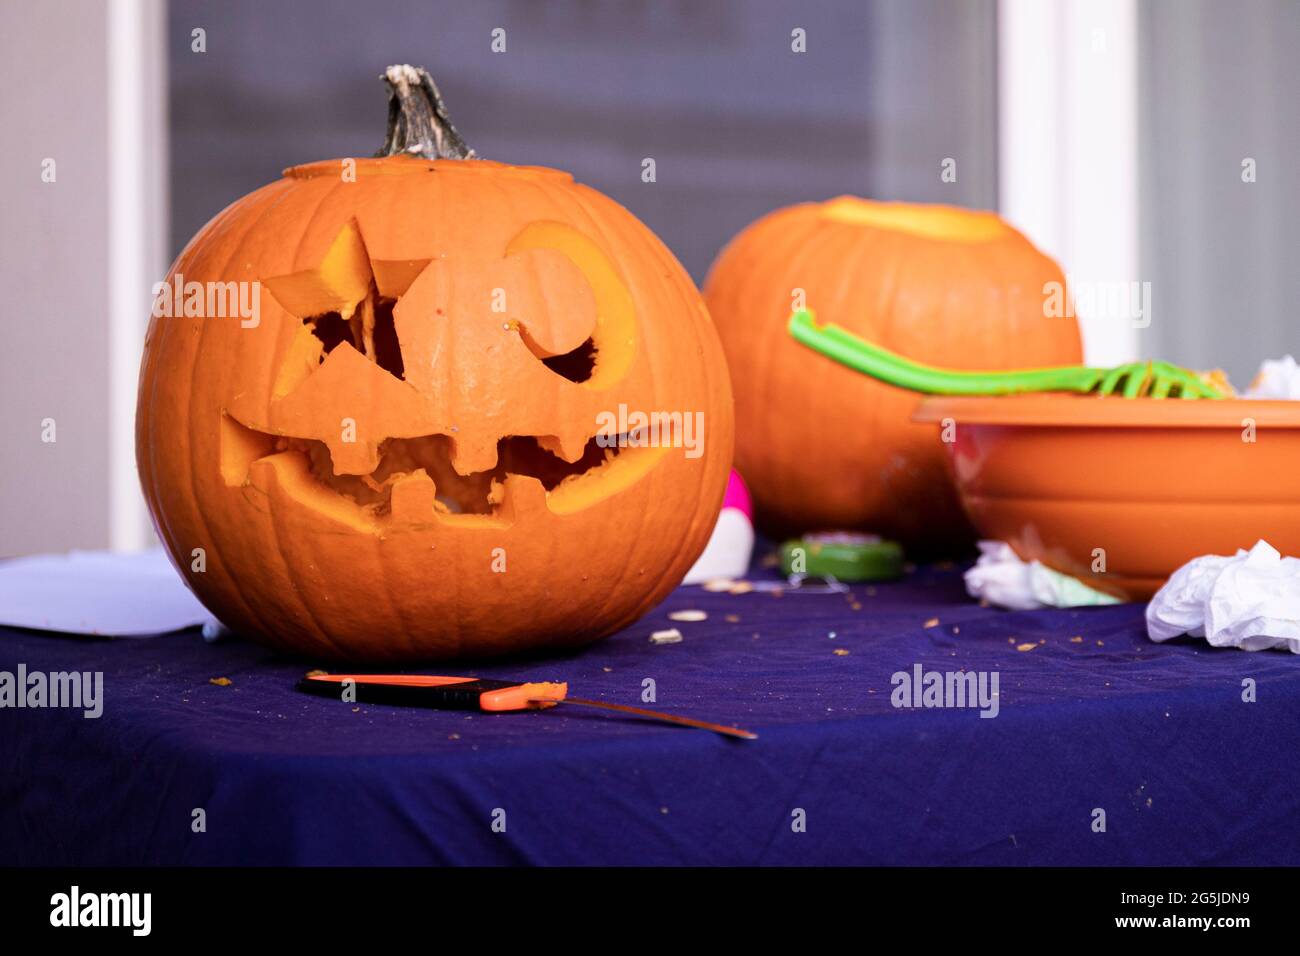 carving a pumpkin on Halloween day, on a blue tablecloth with no people, to make a jack'o Lantern with star and moon eyes. Stock Photo